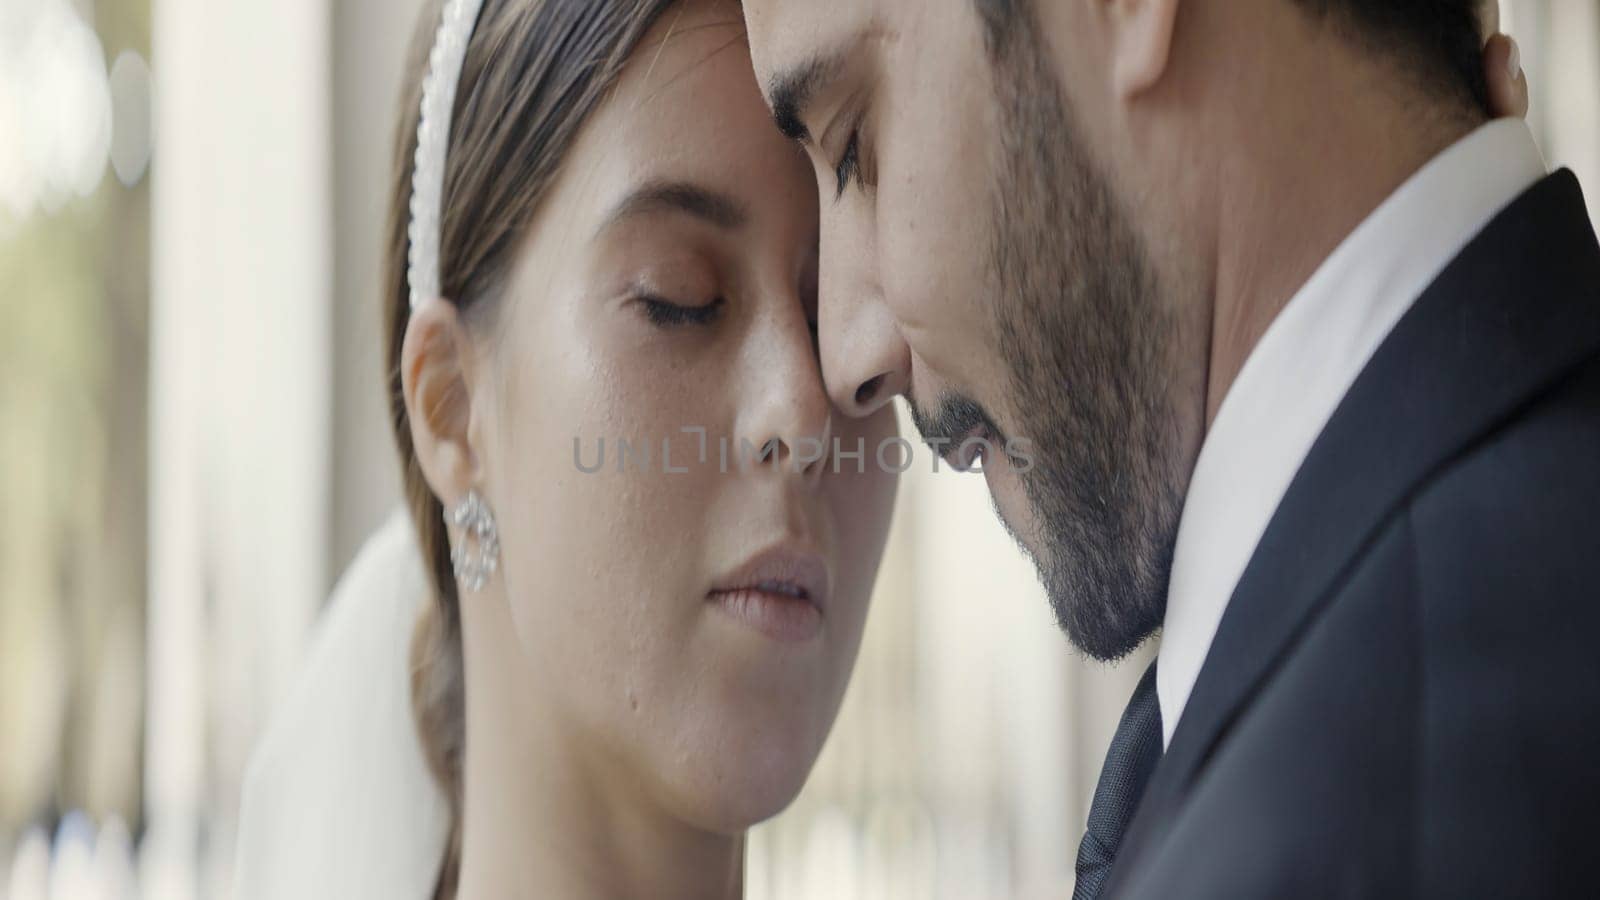 A couple enjoying each other. Action. An adult man with stubble and a cute woman with makeup are bumping into each other's face. High quality 4k footage